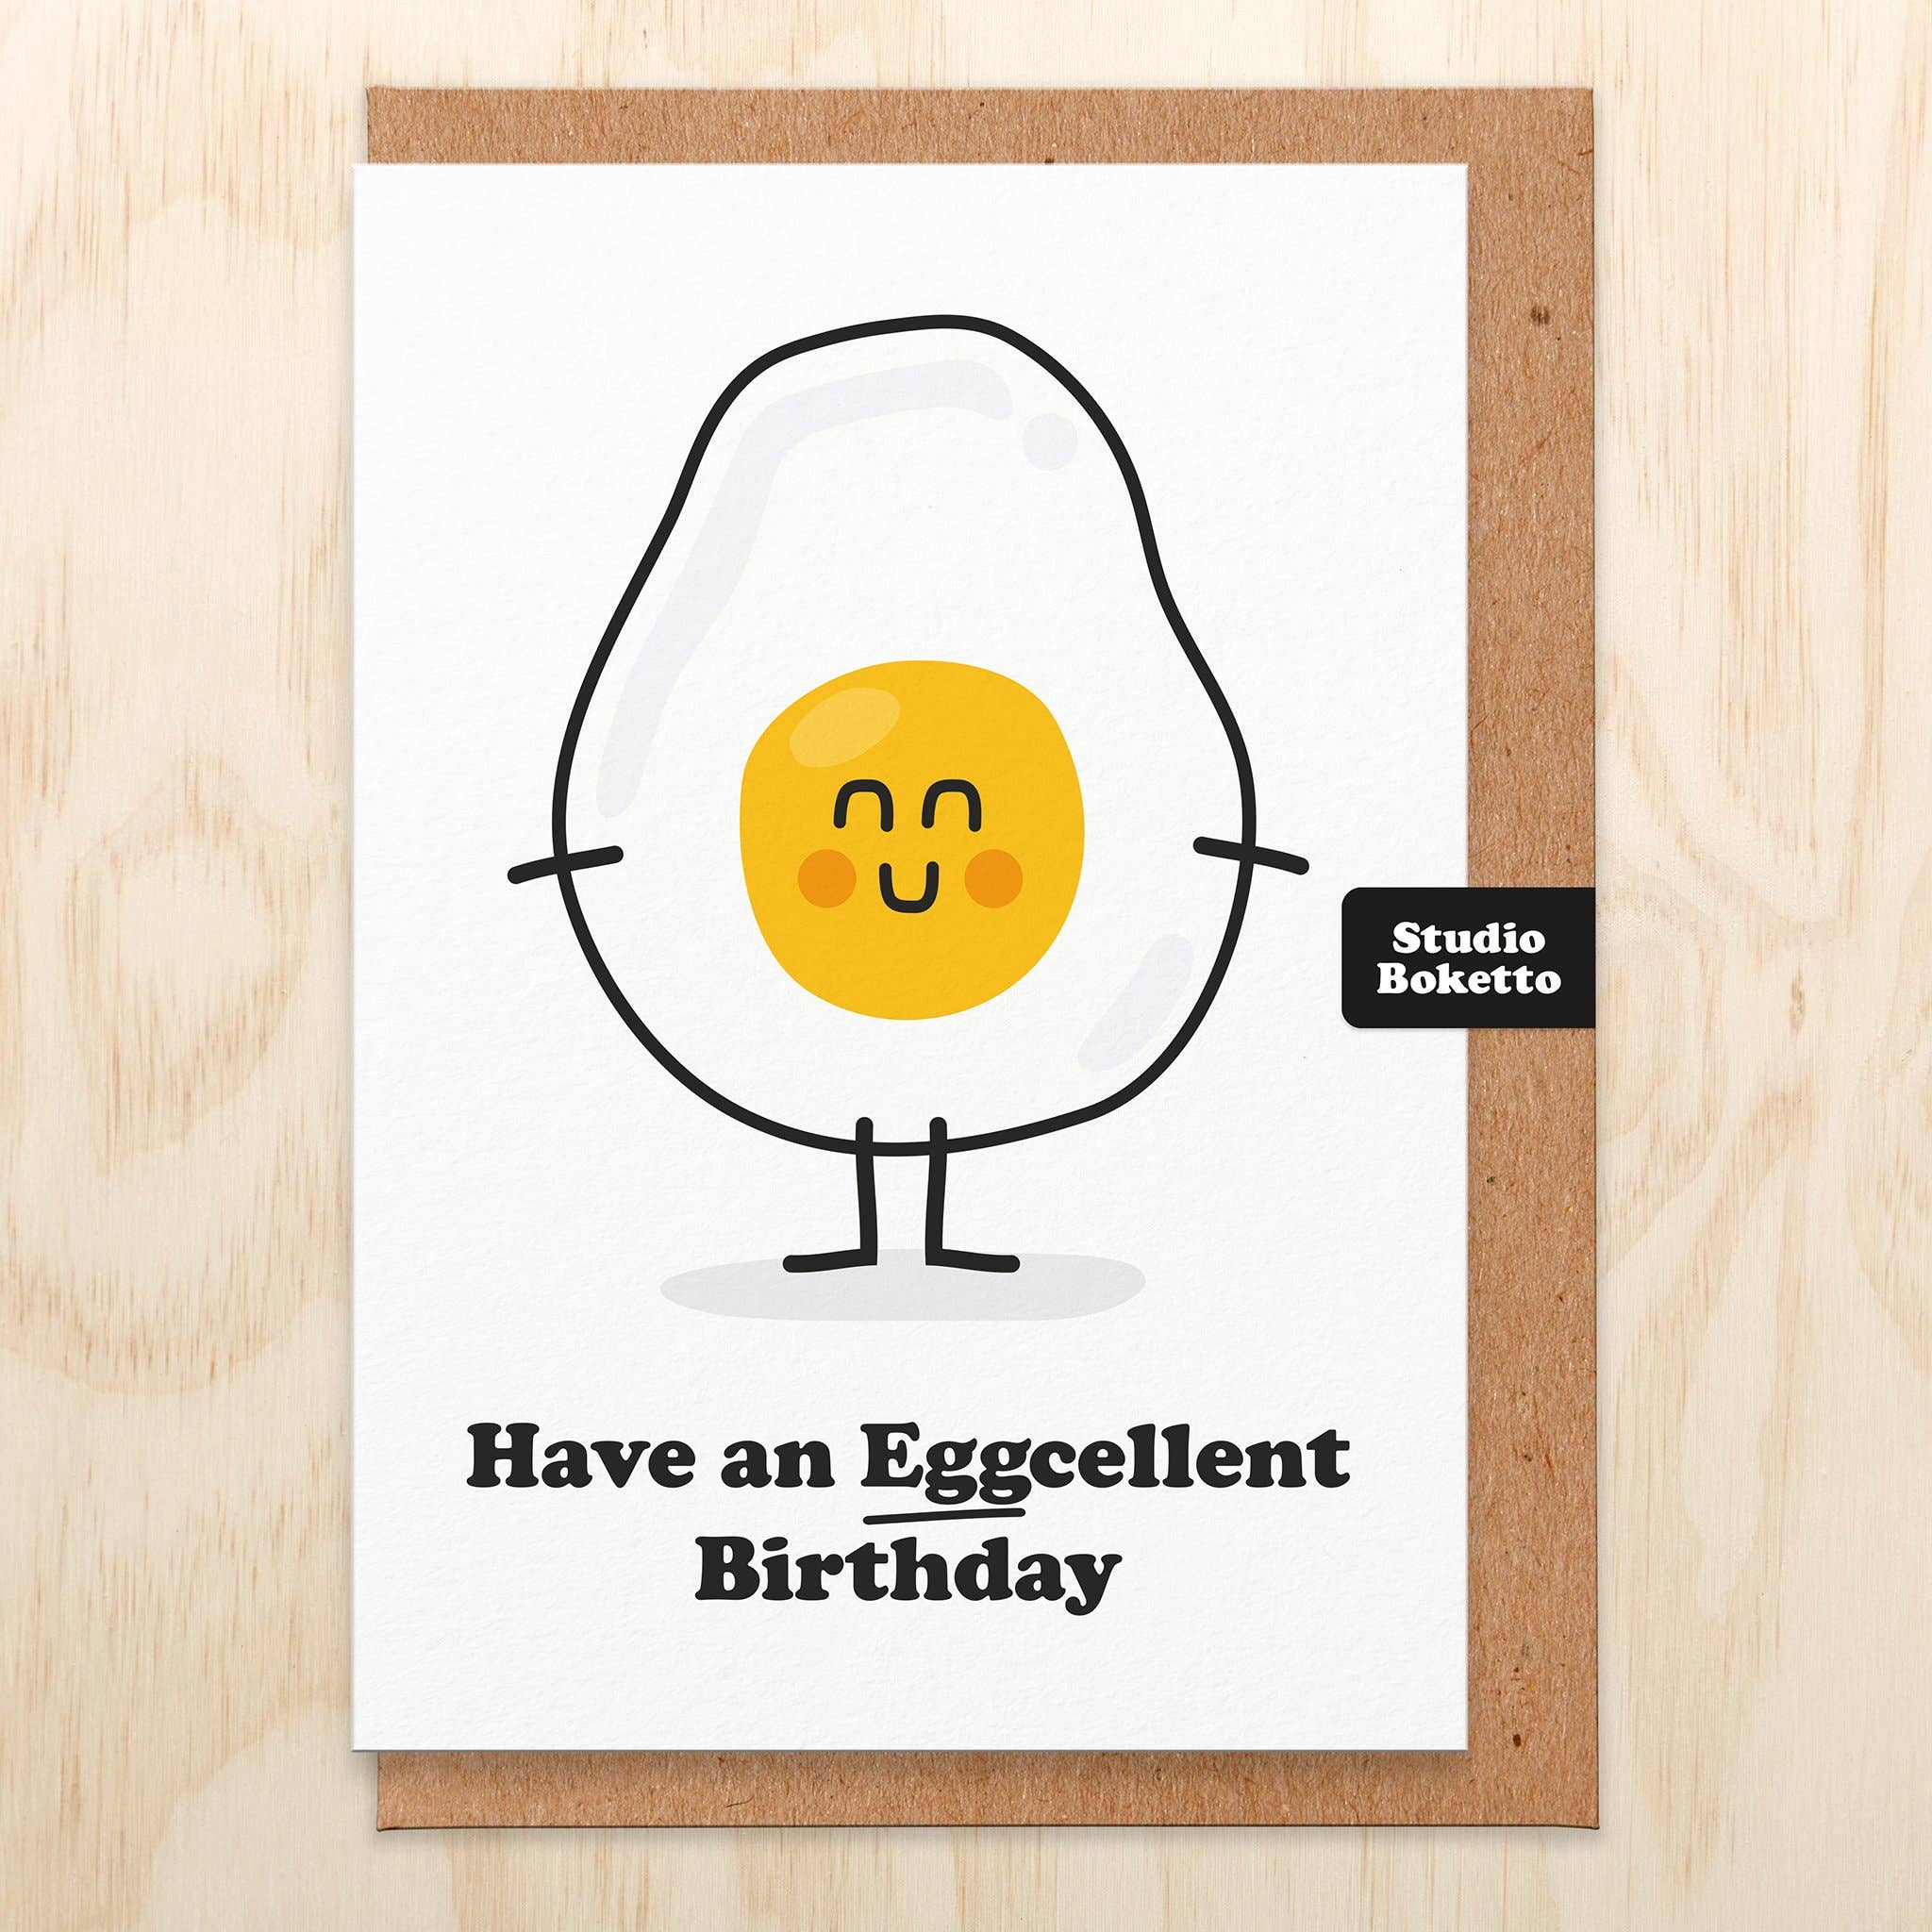 Have an eggcellent Birthday Greeting Card